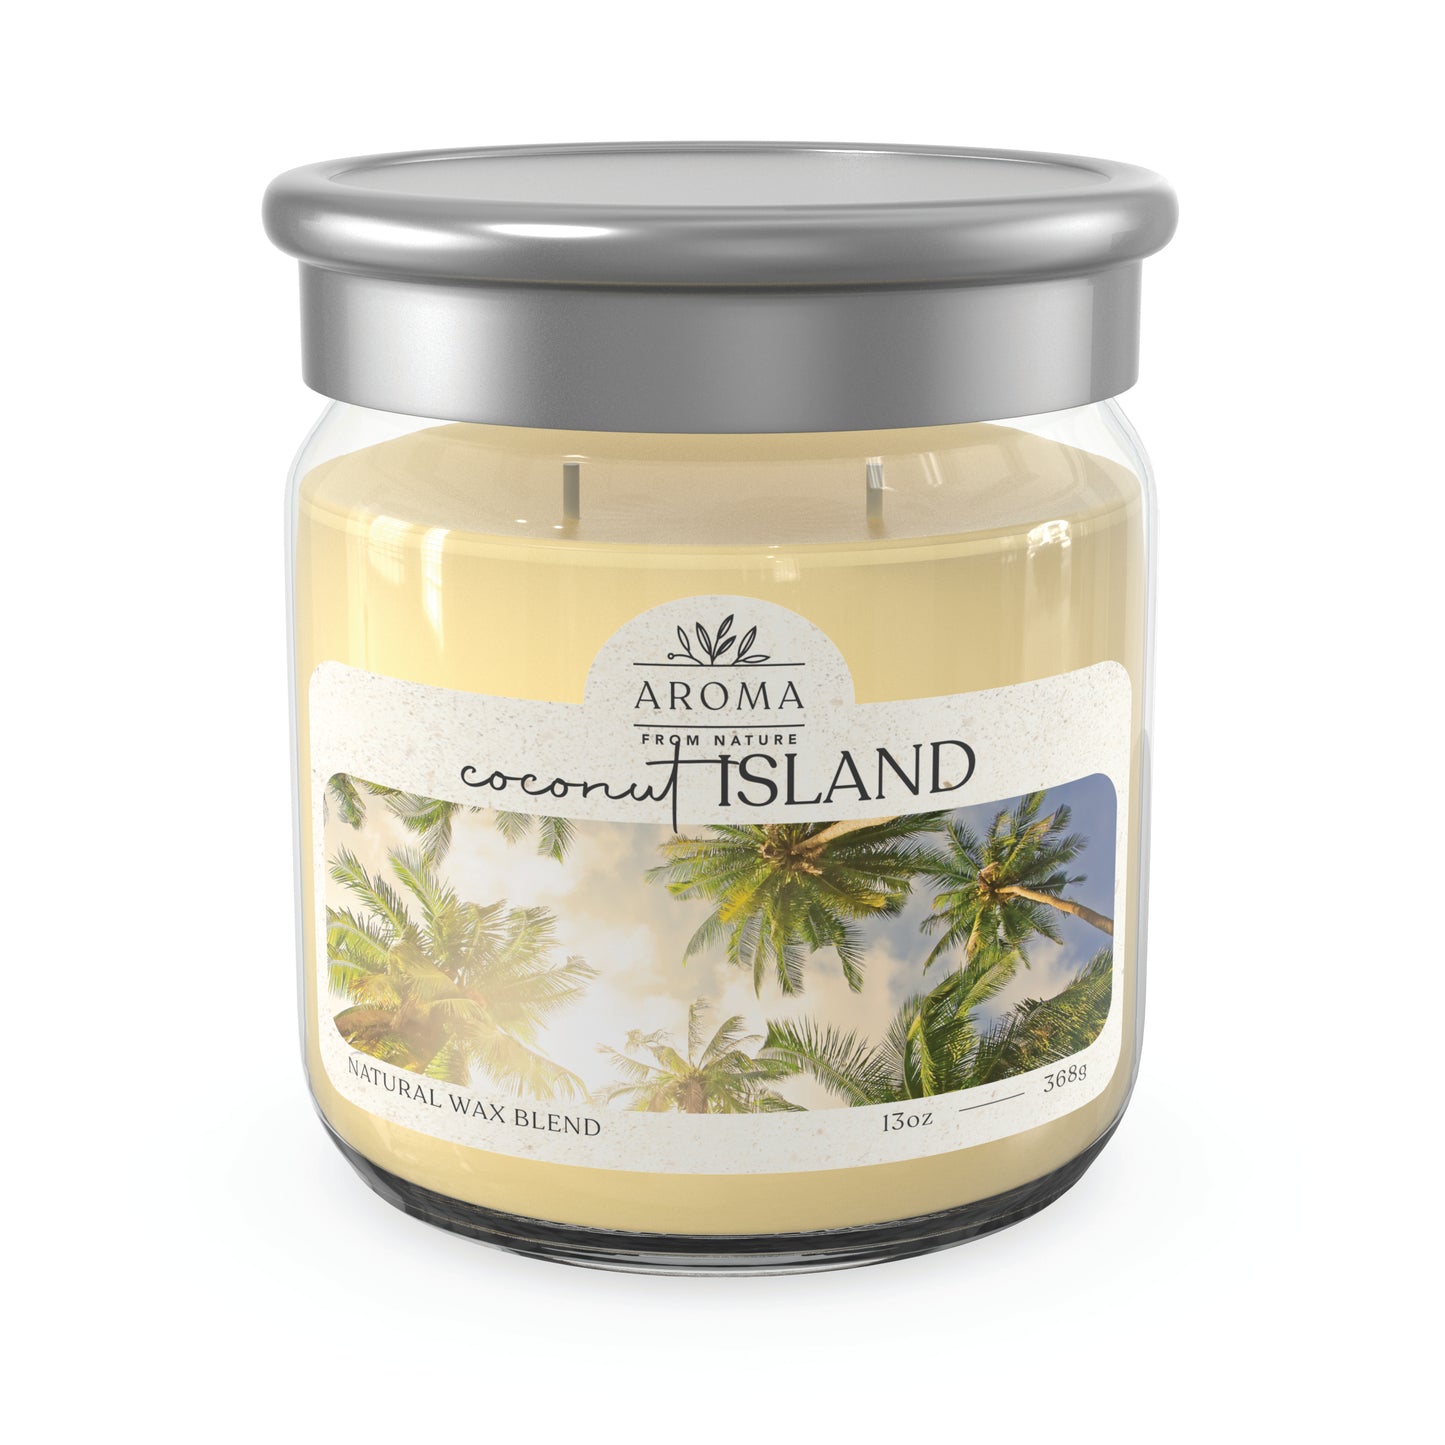 Aroma From Nature - 13 oz Scented Wax - Coconut Island